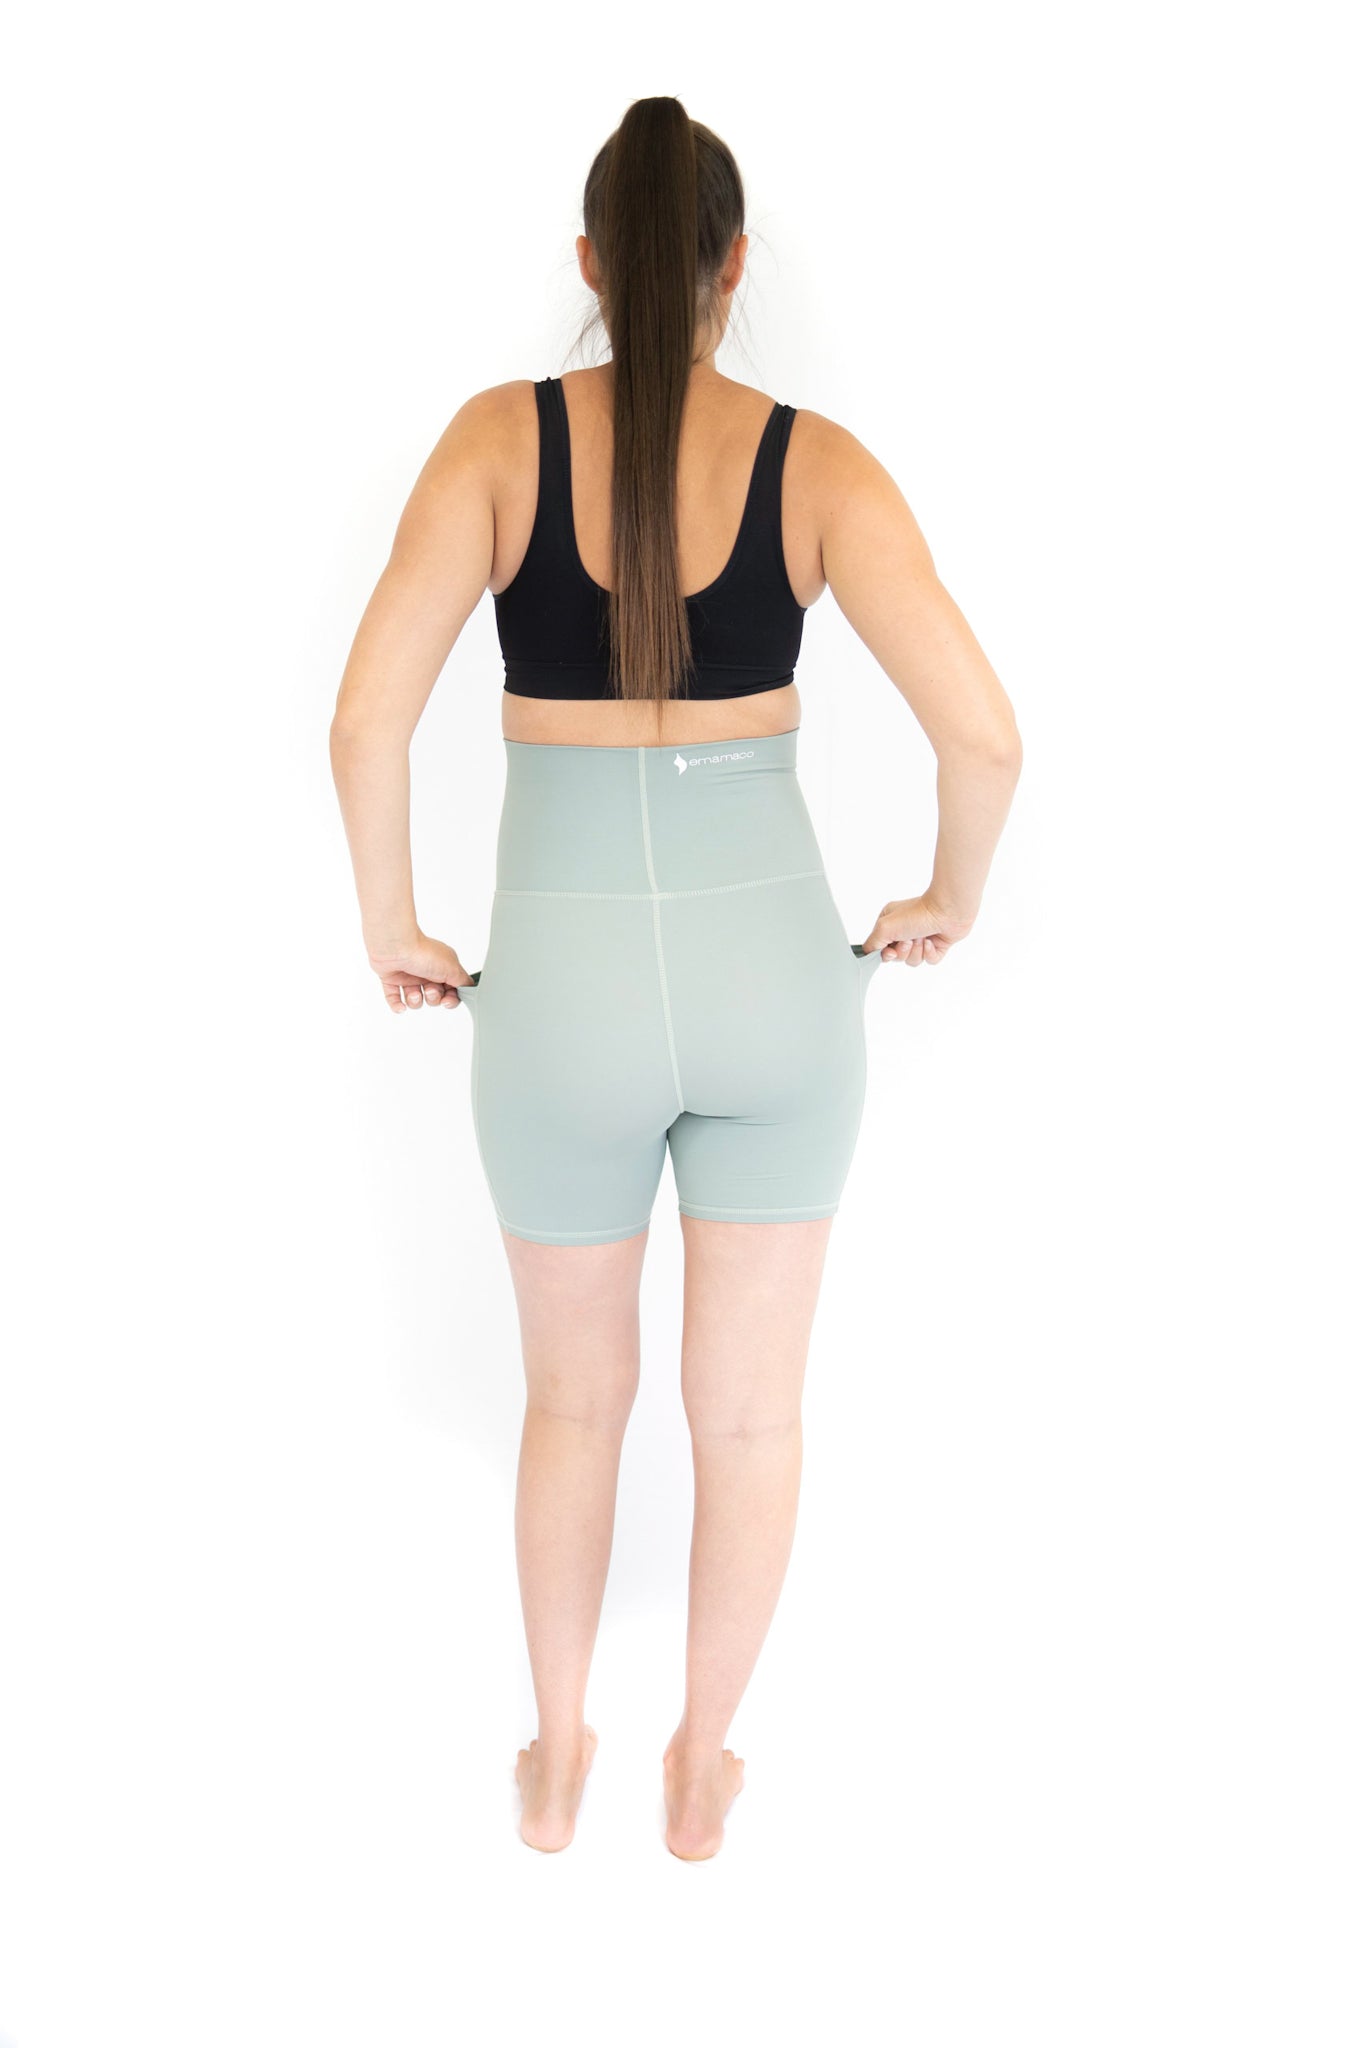 Emama Maternity long Shorts + Pockets - Spearmint-FINAL SALE ONLY